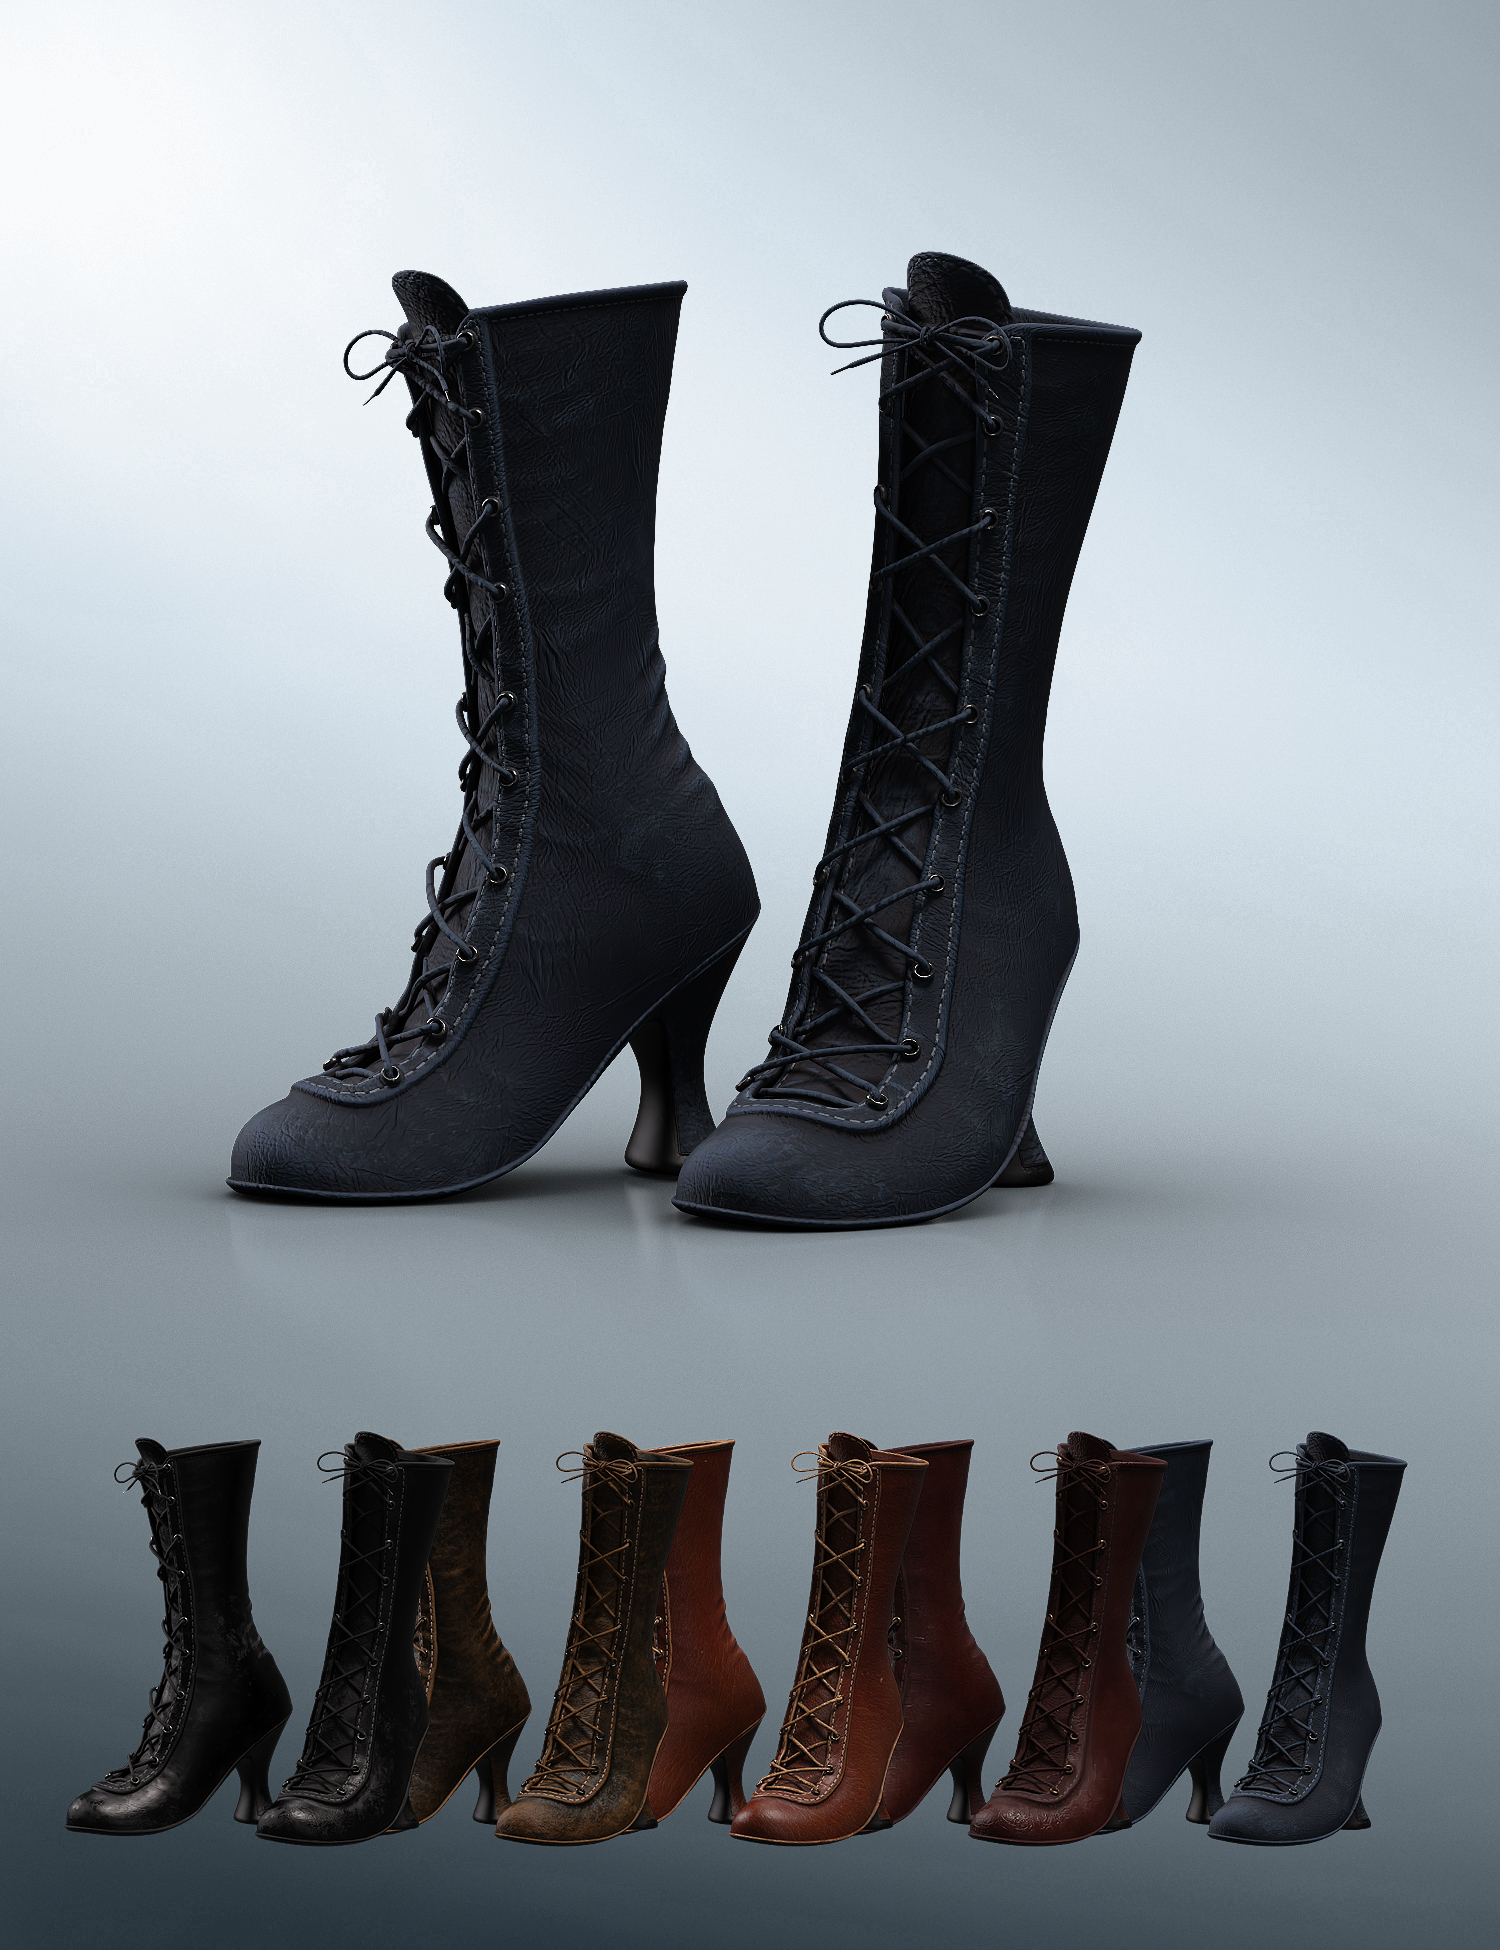 CB Clementine Boots for Genesis 8 and 8.1 Females